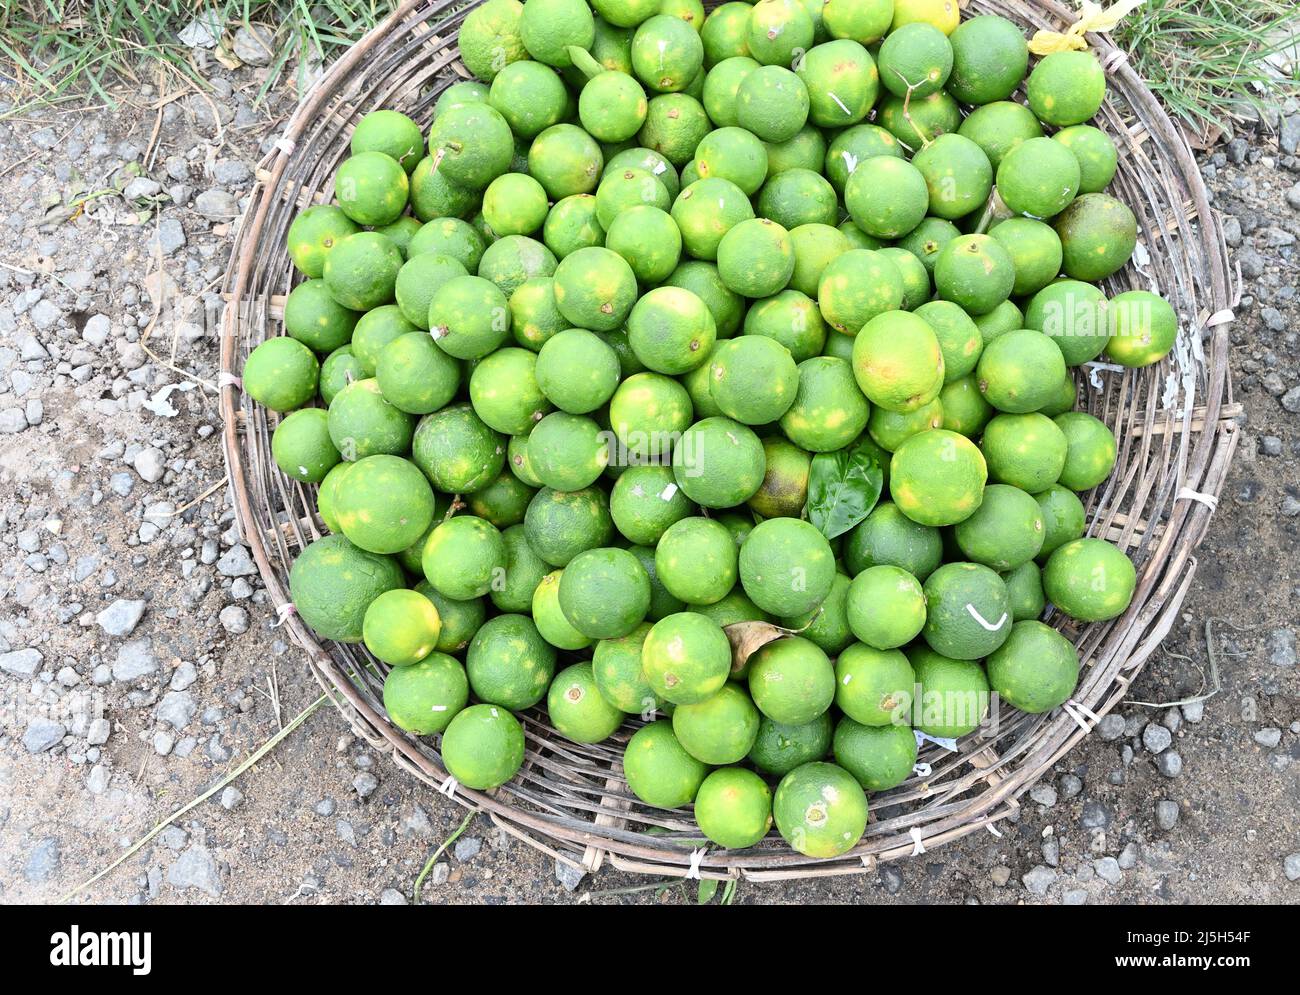 Overhead view of a basket full of Sweet Orange fruits (Citrus sinensis) on the ground Stock Photo